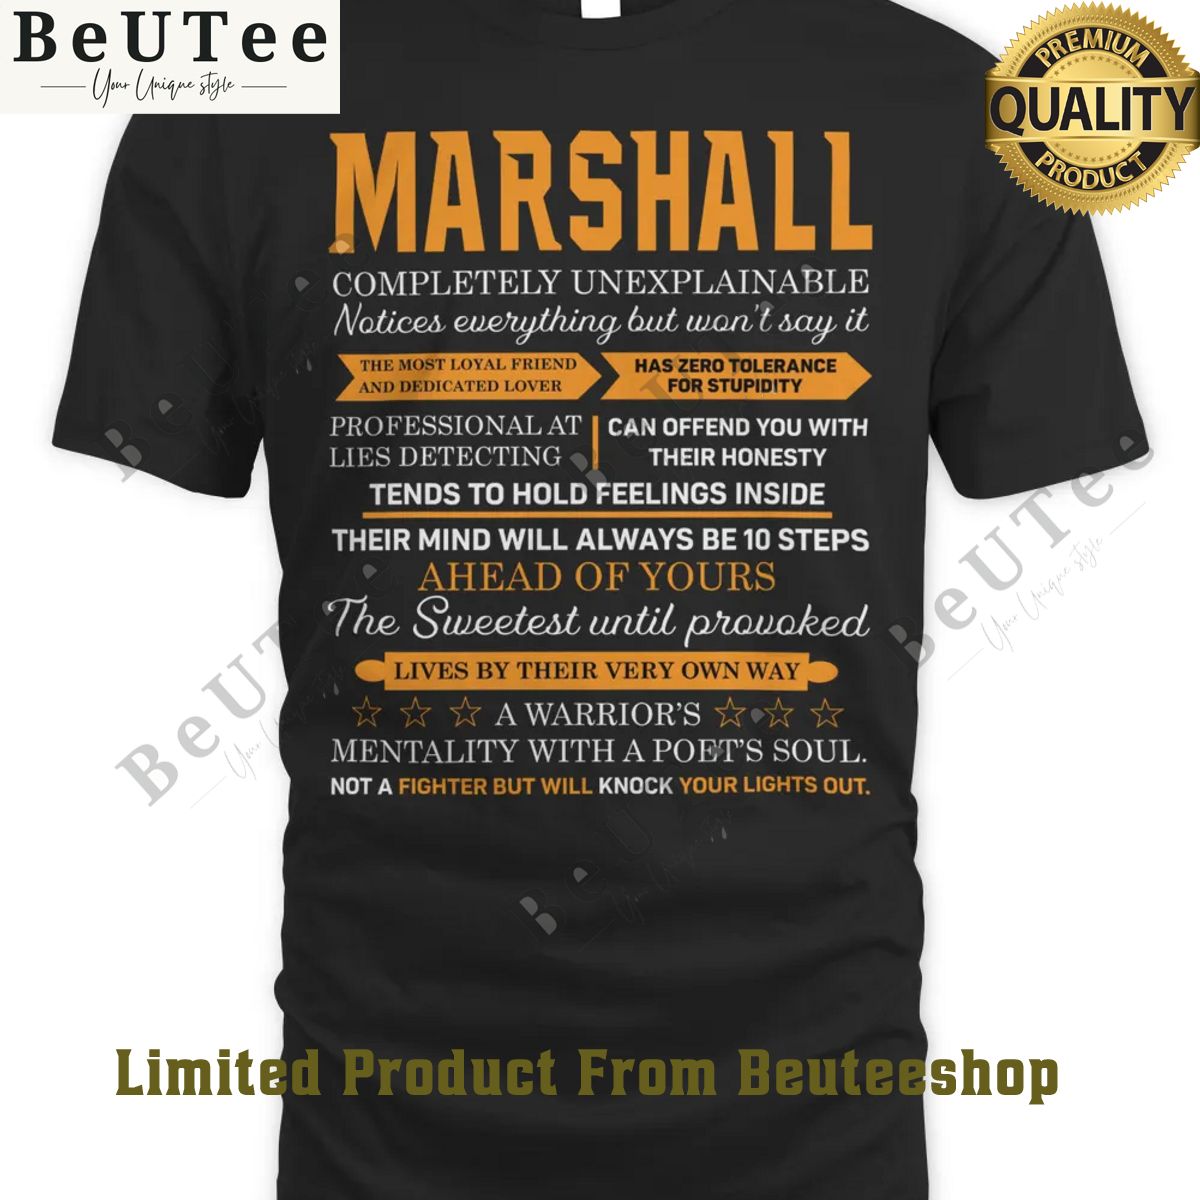 lives by their very own way marshall zero tolerance for stupidity 2d t shirt 1 pOZzW.jpg